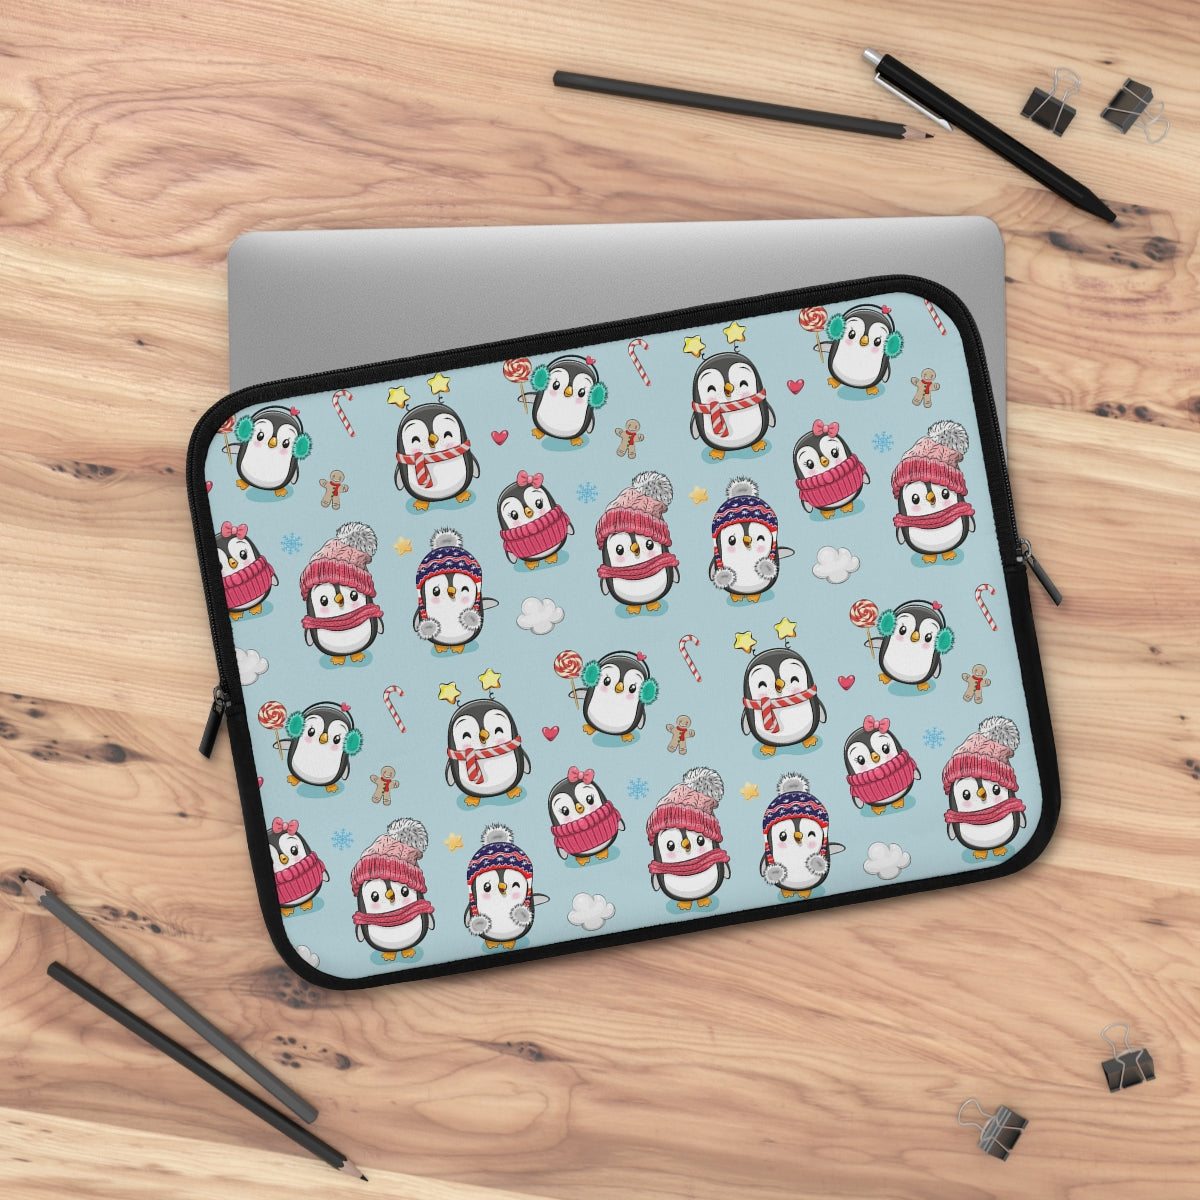 Penguins in Winter Clothes Laptop Sleeve